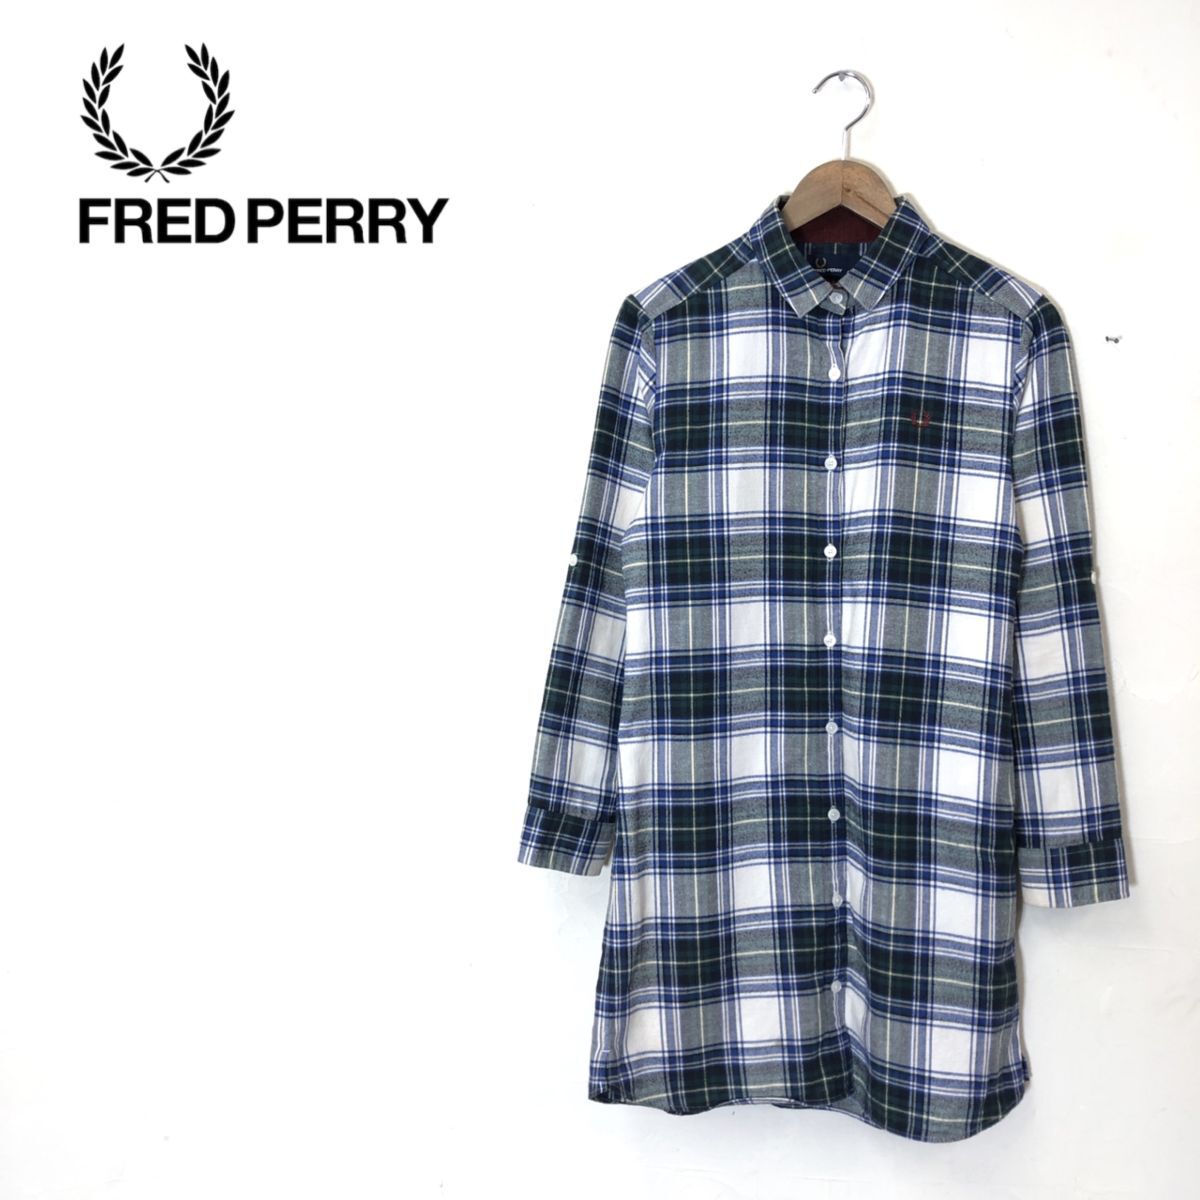 A922-U*FRED PERRY Fred Perry shirt long sleeve long shirt embroidery Logo check pattern casual trad piling put on *size S blue group cotton 100%